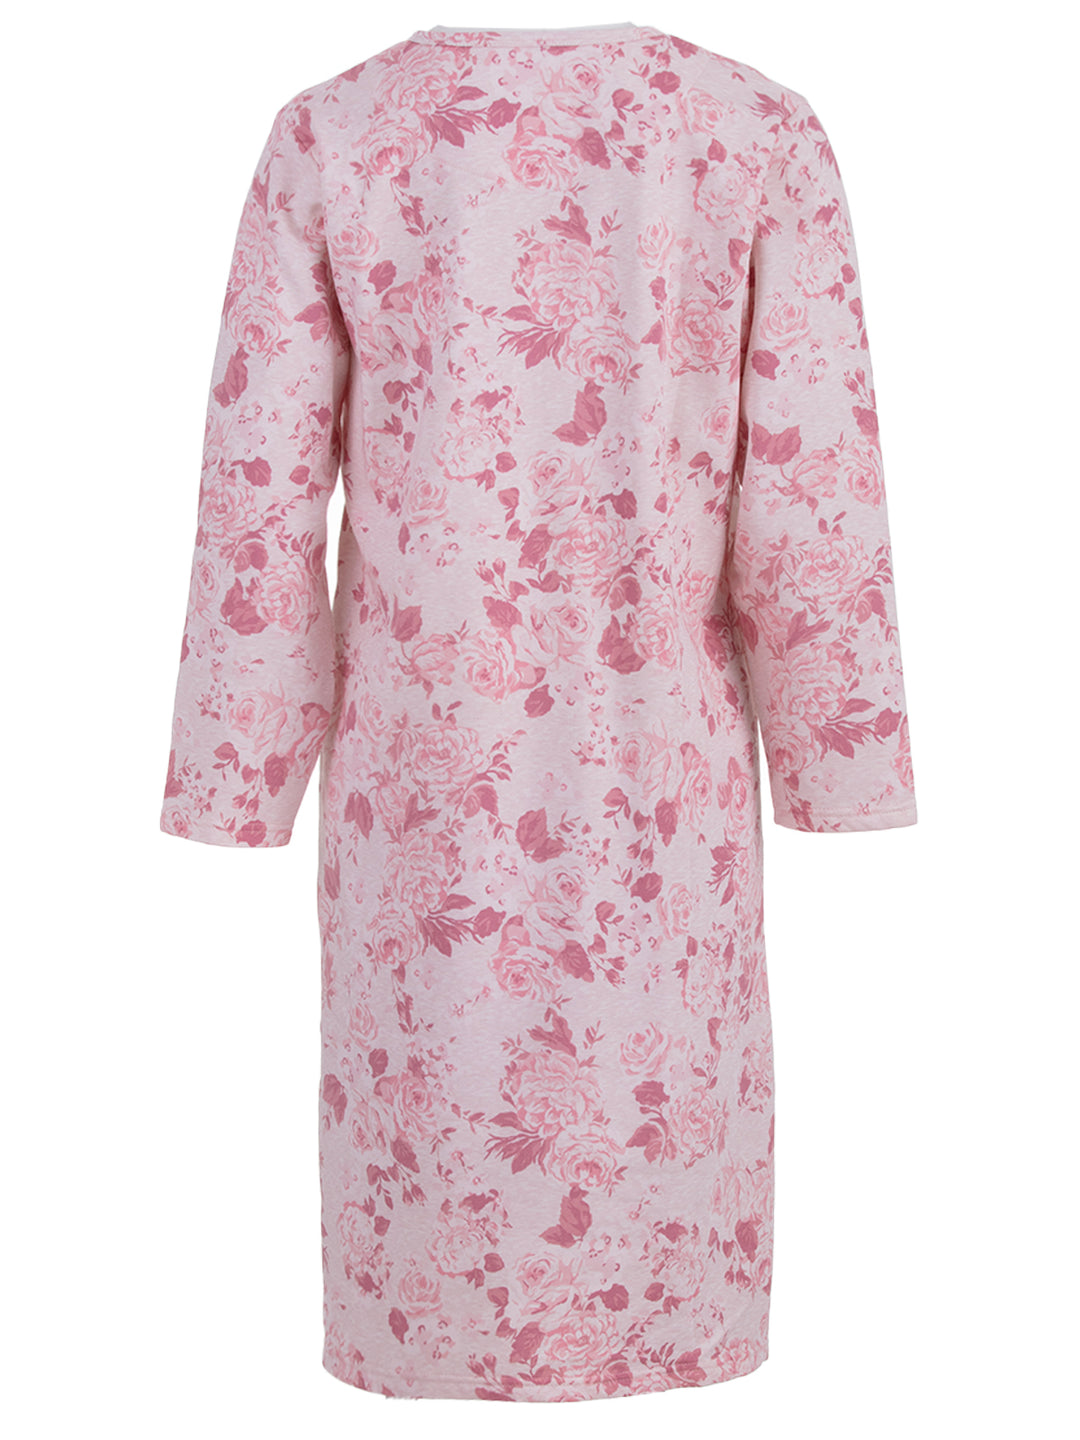 Thermal nightgown - roses flowers